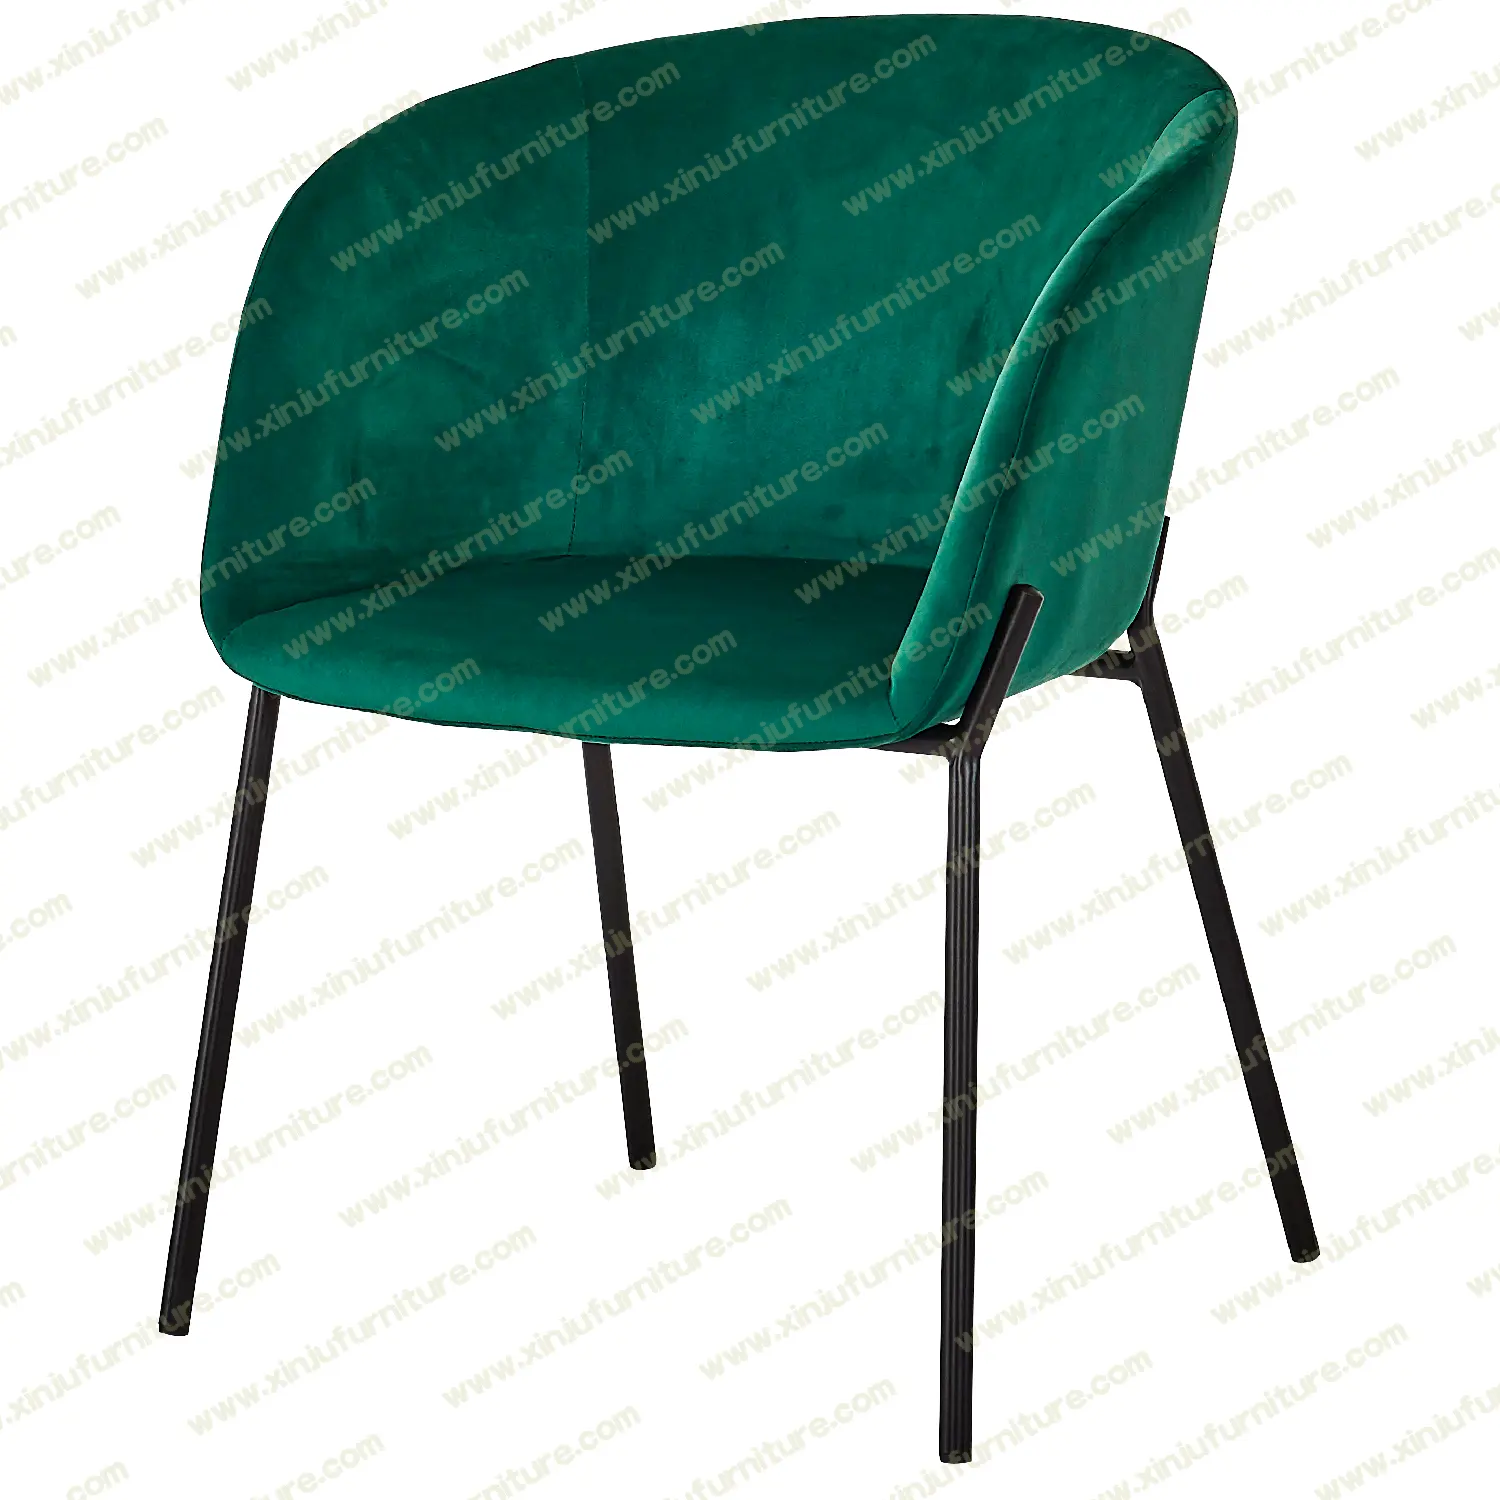 Comfortable and simple tufted dining chair